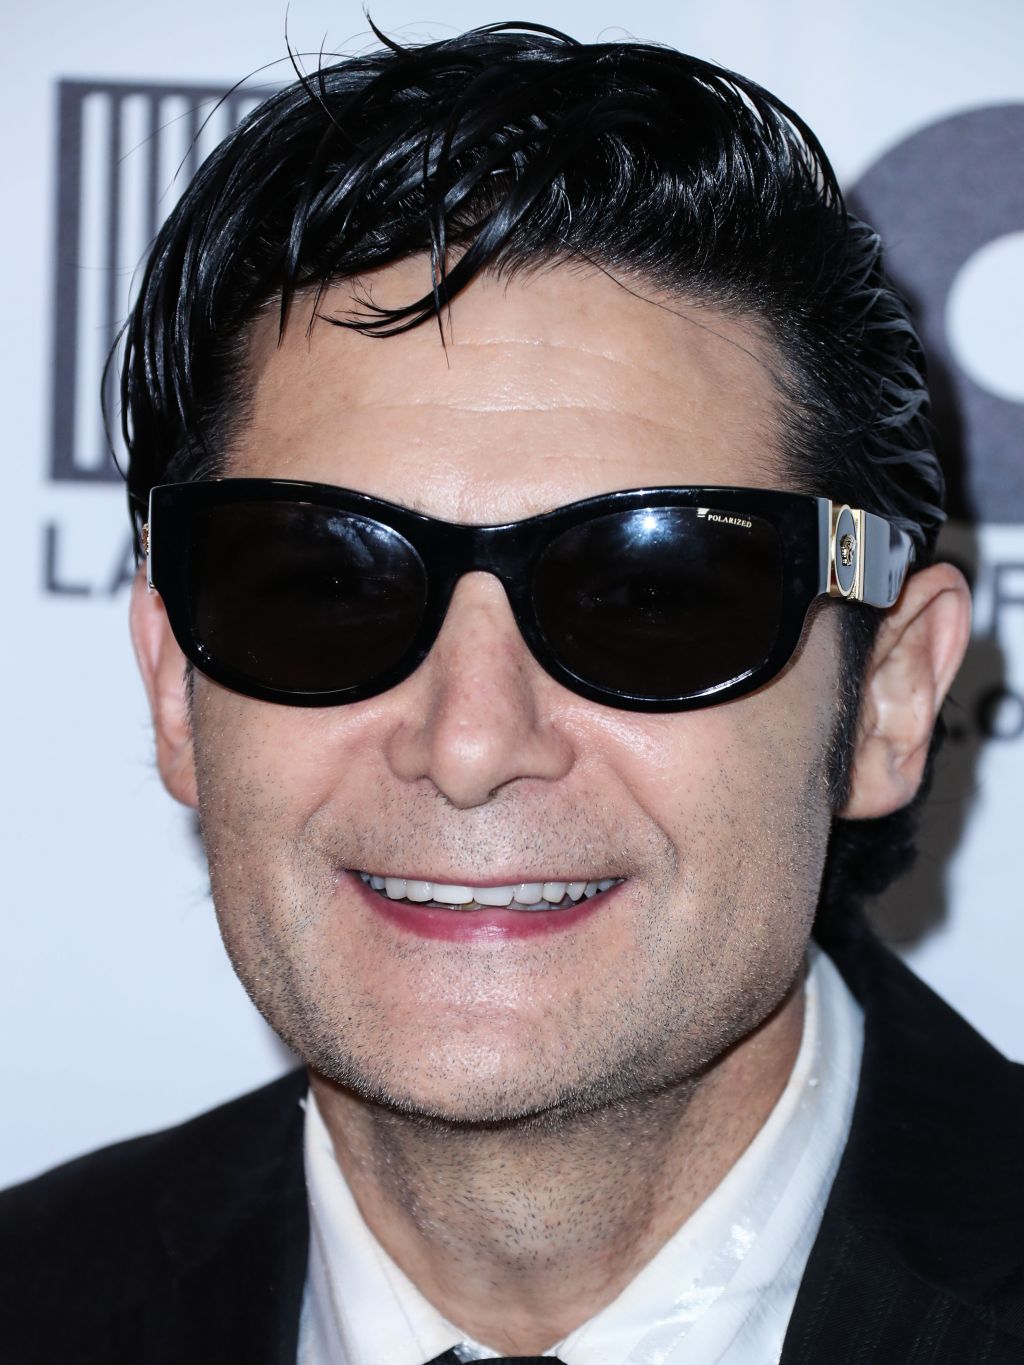 Corey Feldman arrives at the Last Chance For Animals&apos; 35th Anniversary Gala held at The Beverly Hilton Hotel on October 19, 2019 in Beverly Hills, Los Angeles, California, United States.